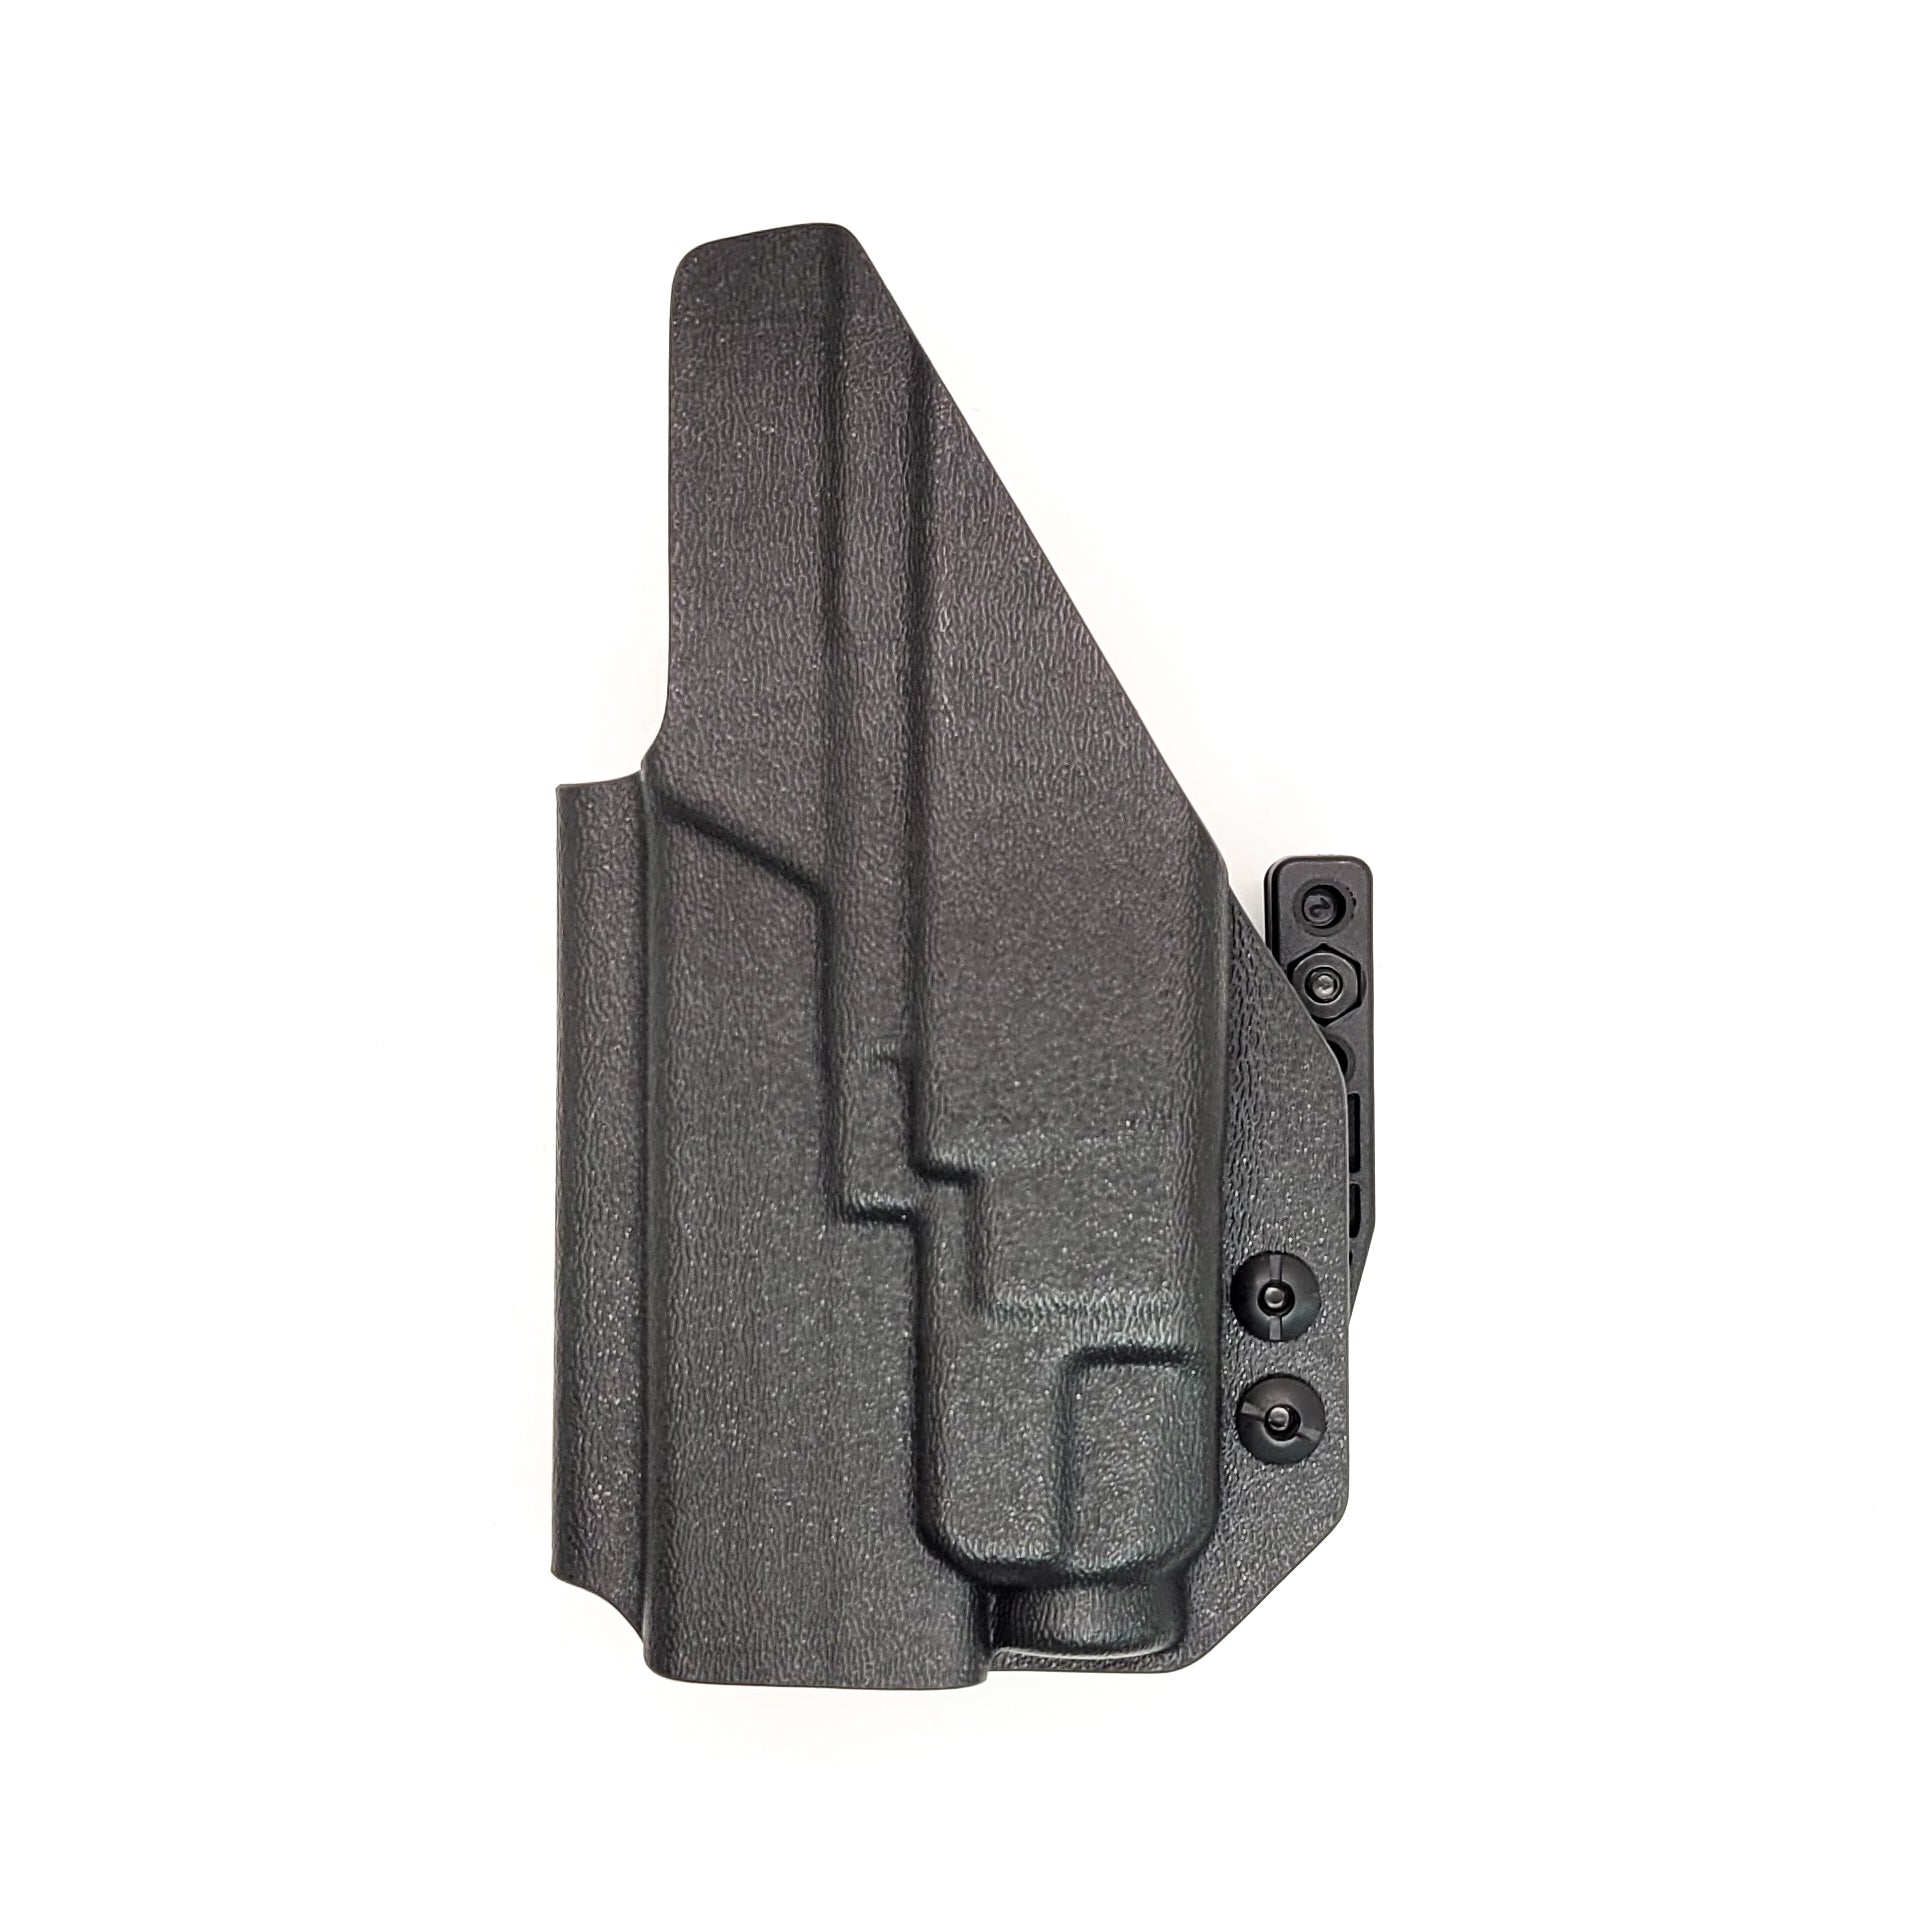 Inside Waistband Holster designed to fit the Springfield Hellcat Pro pistol with the Streamlight TLR-7 & TLR-7A light mounted to the handgun. The holster retention is on the light itself and not the pistol. Full sweat guard, adjustable retention, minimal material, and smooth edges to reduce printing. Made in the USA.